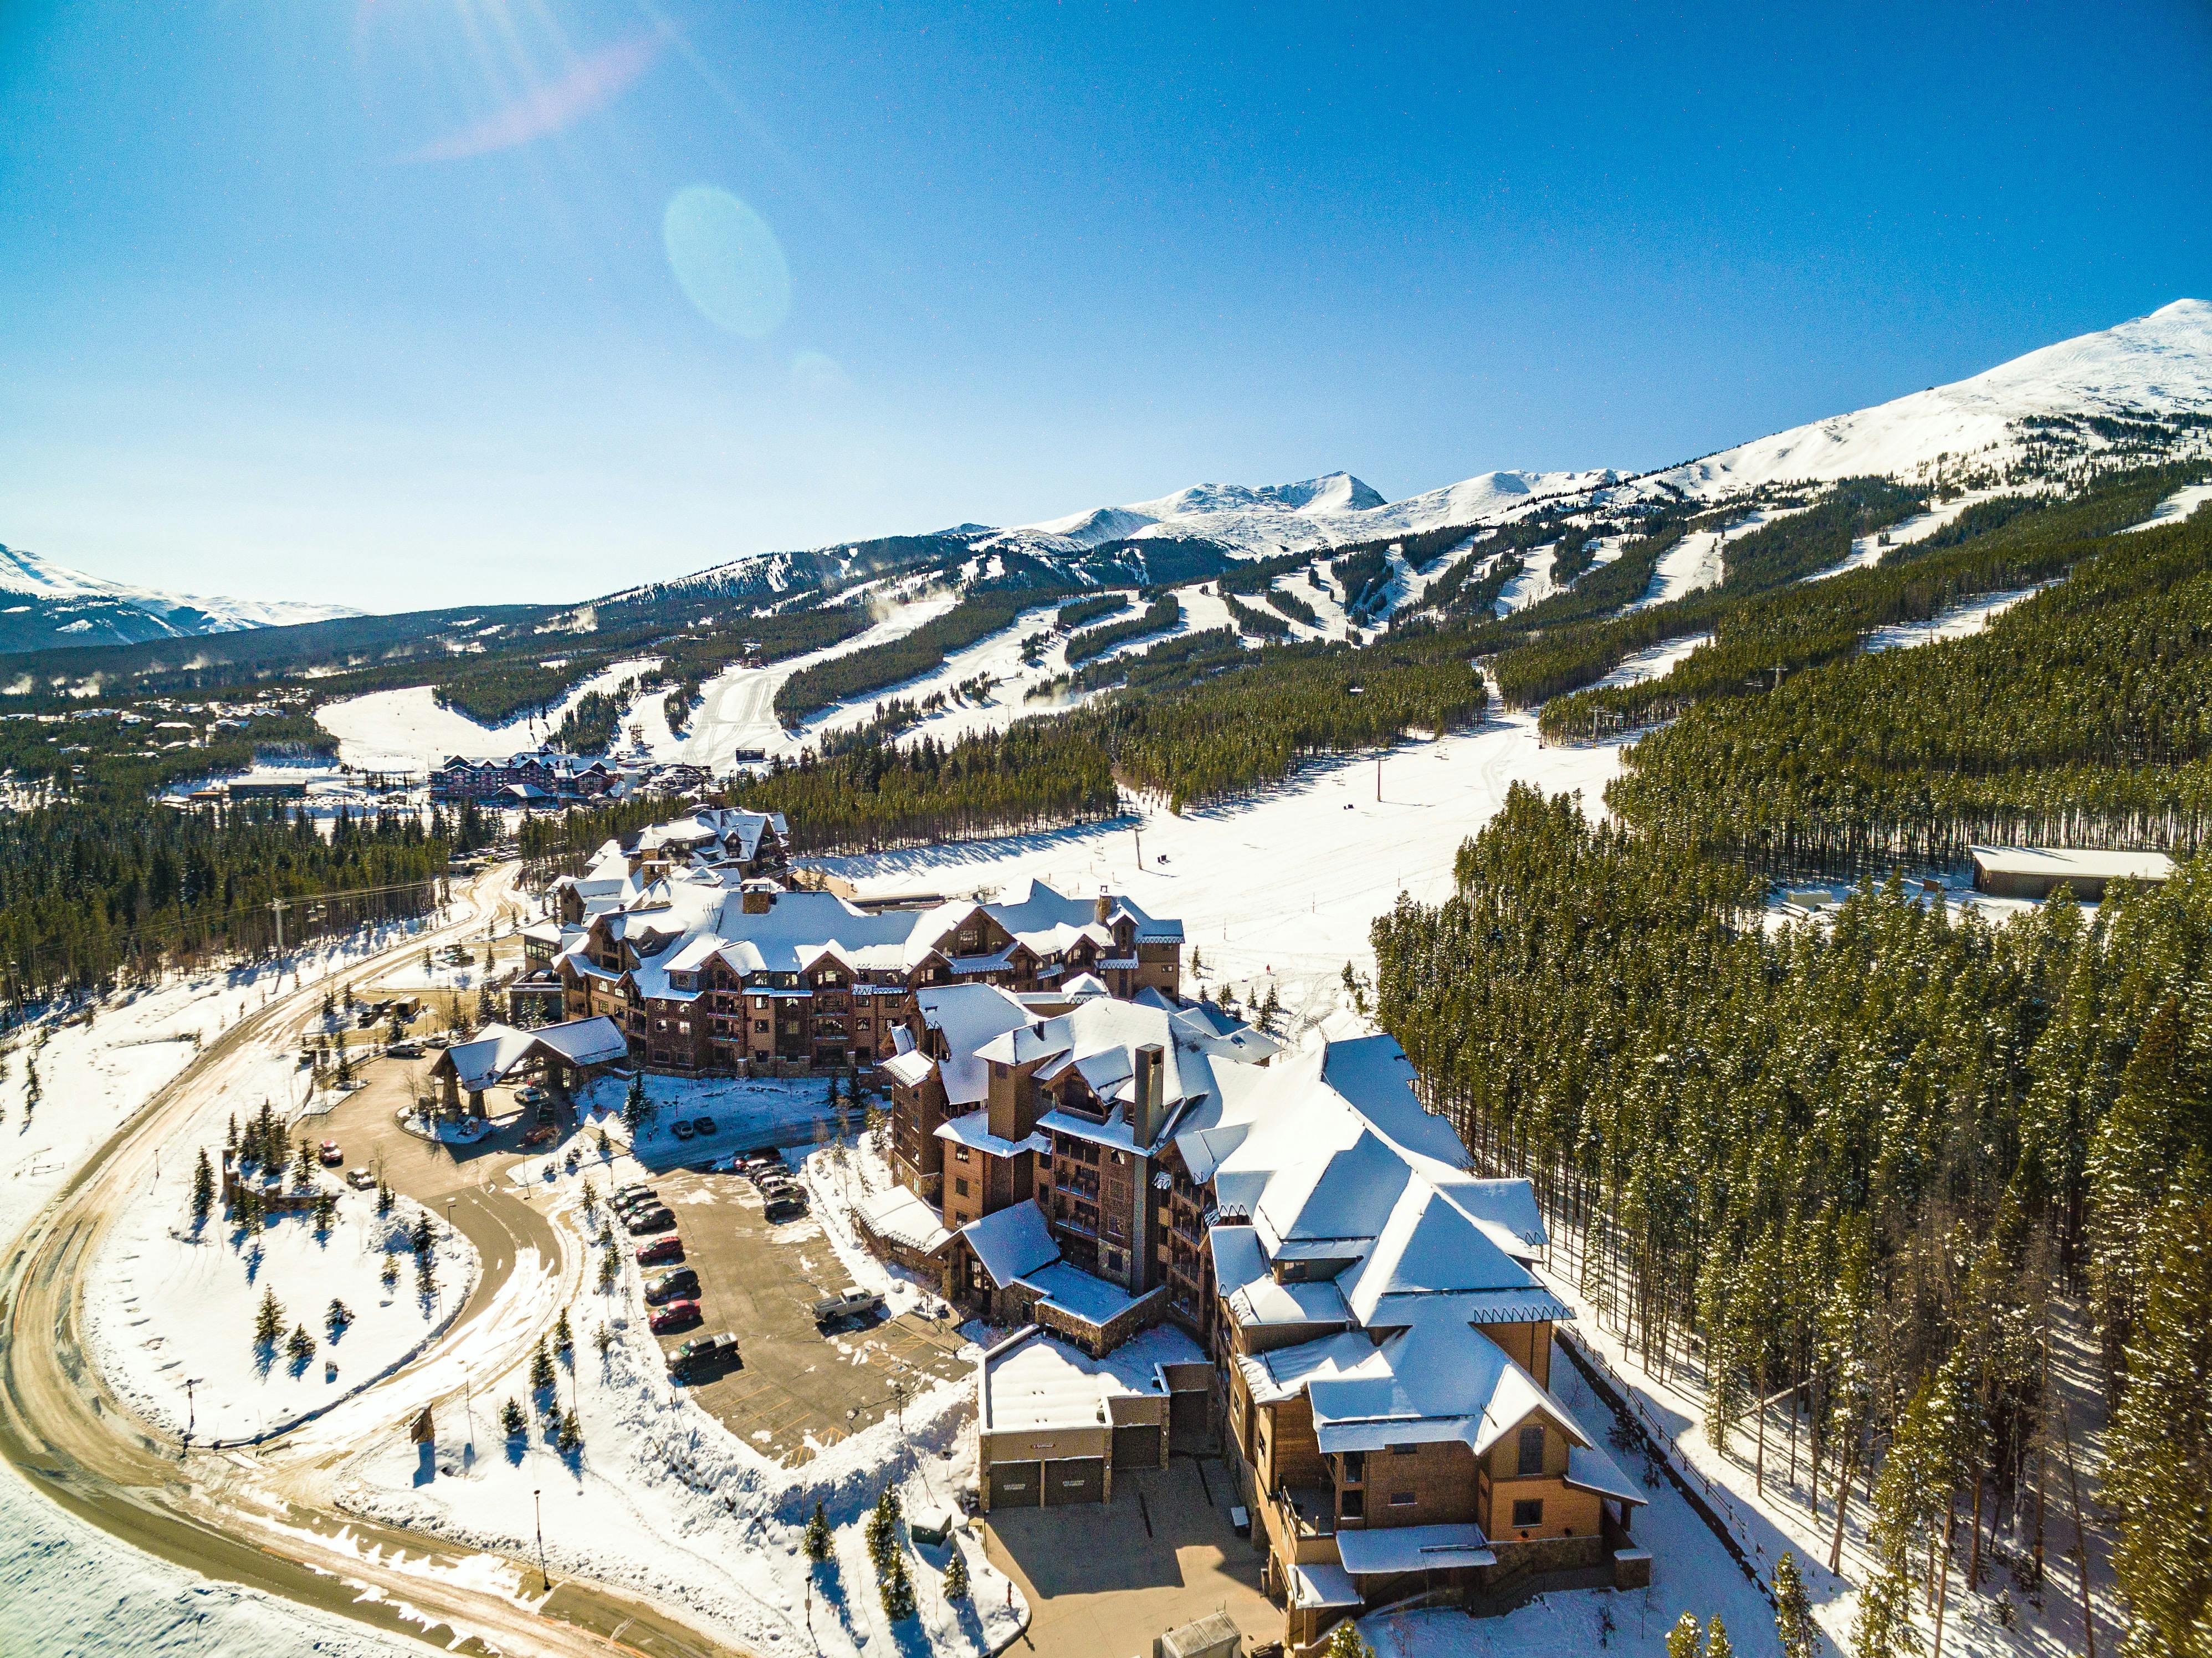 A view of the town of Breckenridge, Colorado with a ski resort in the background. 